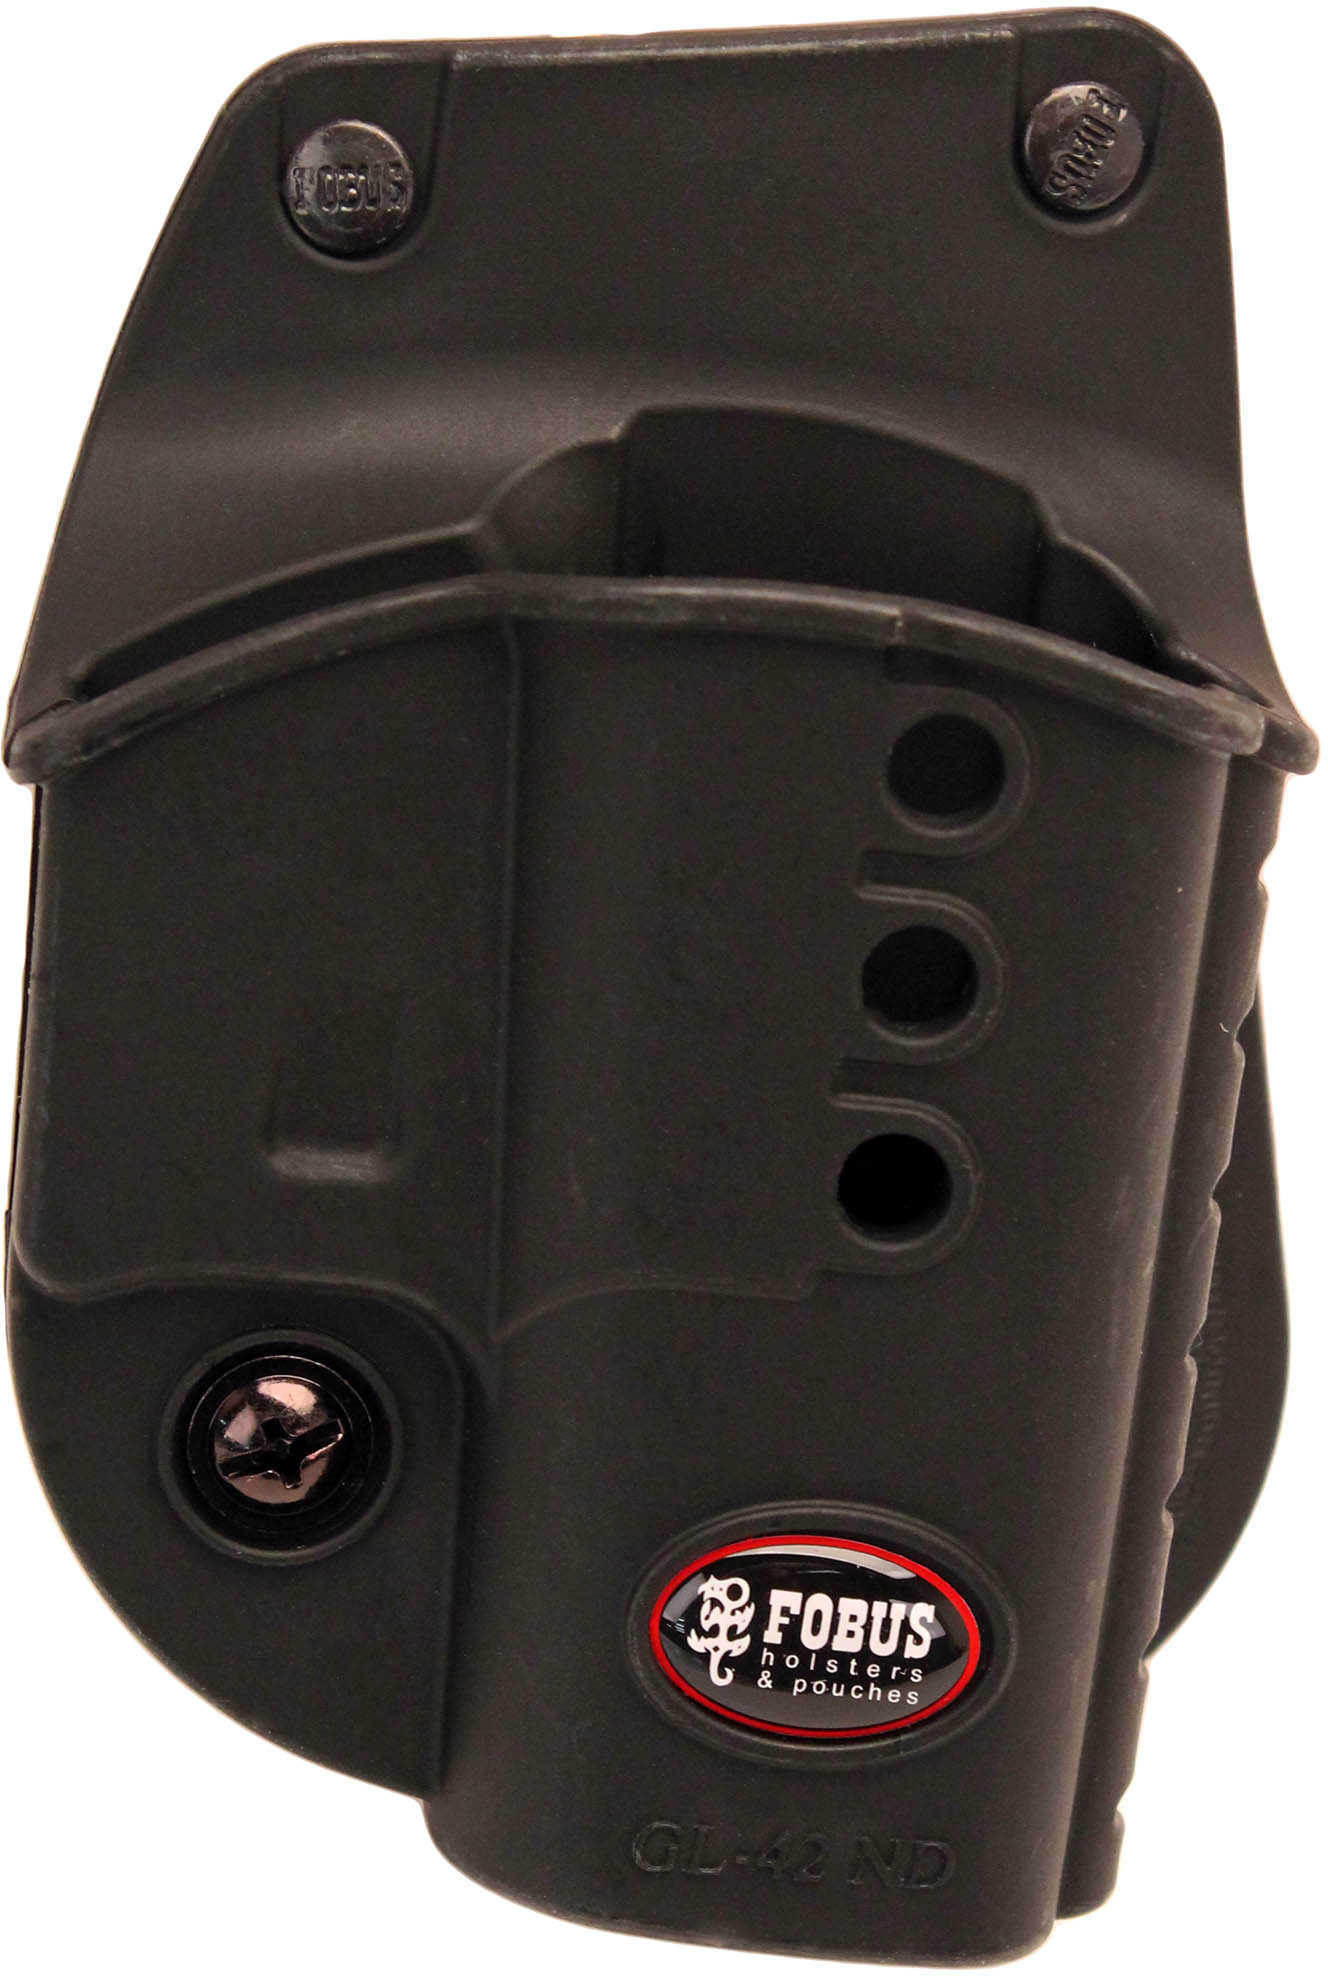 Fobus GL42Nd Paddle Holster Right Hand Black for Glock 42 Polymer